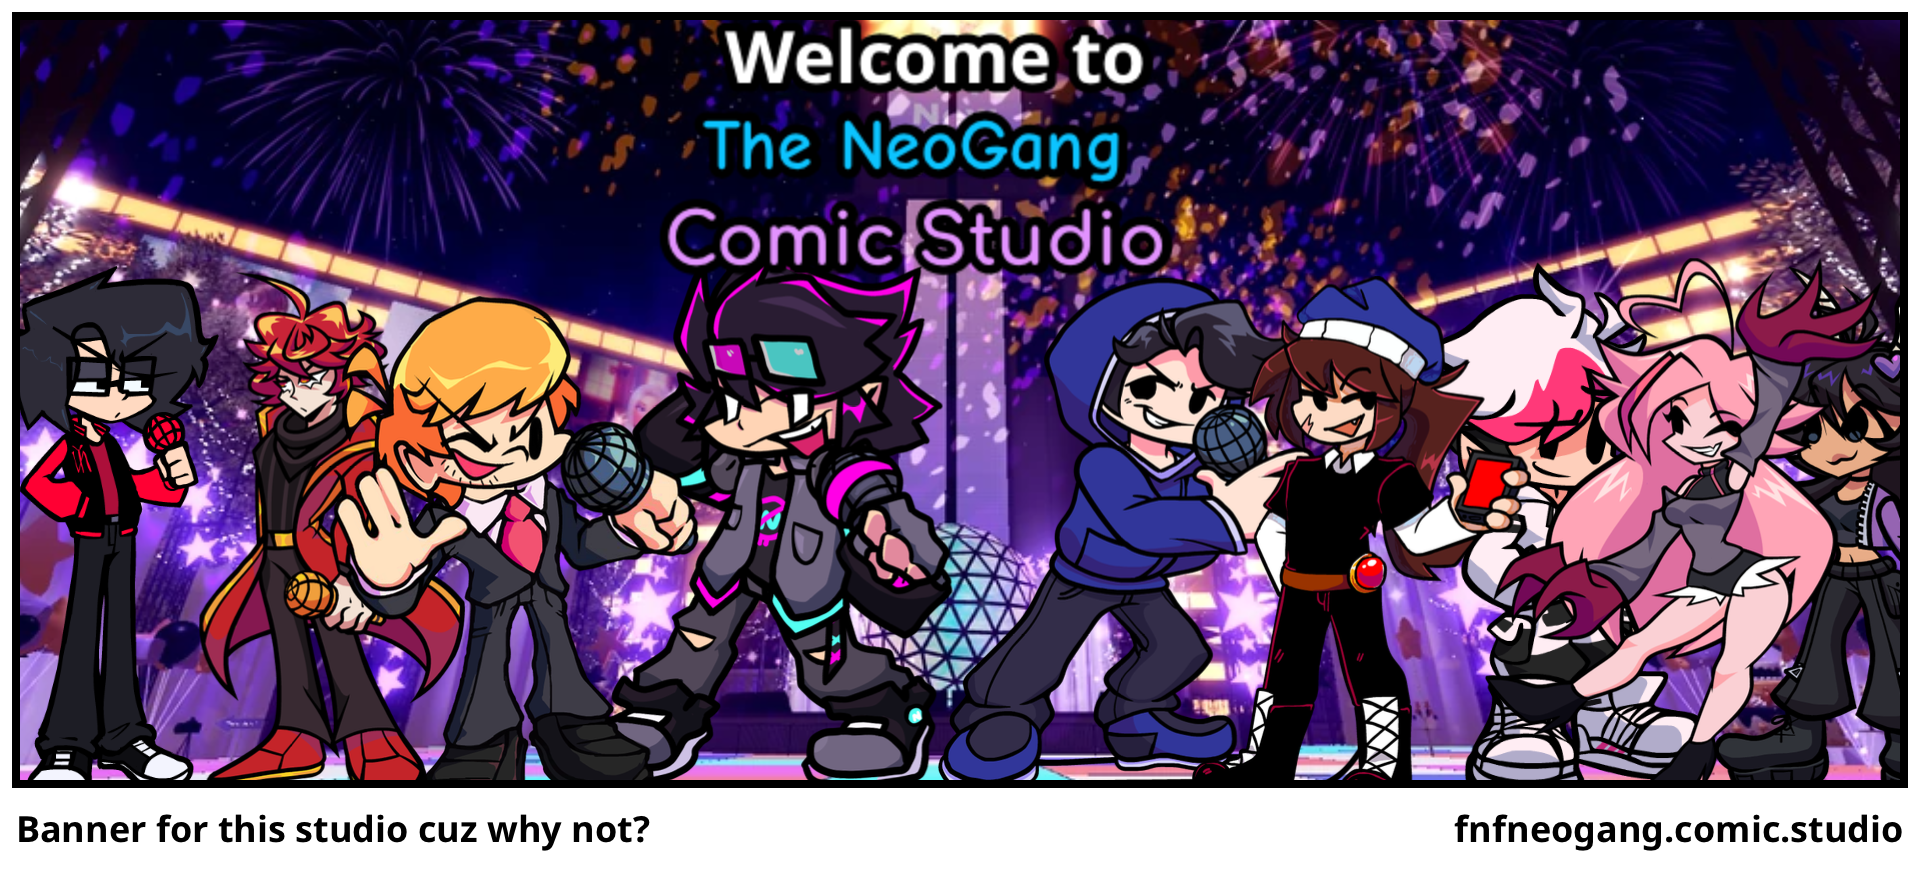 Banner for this studio cuz why not?